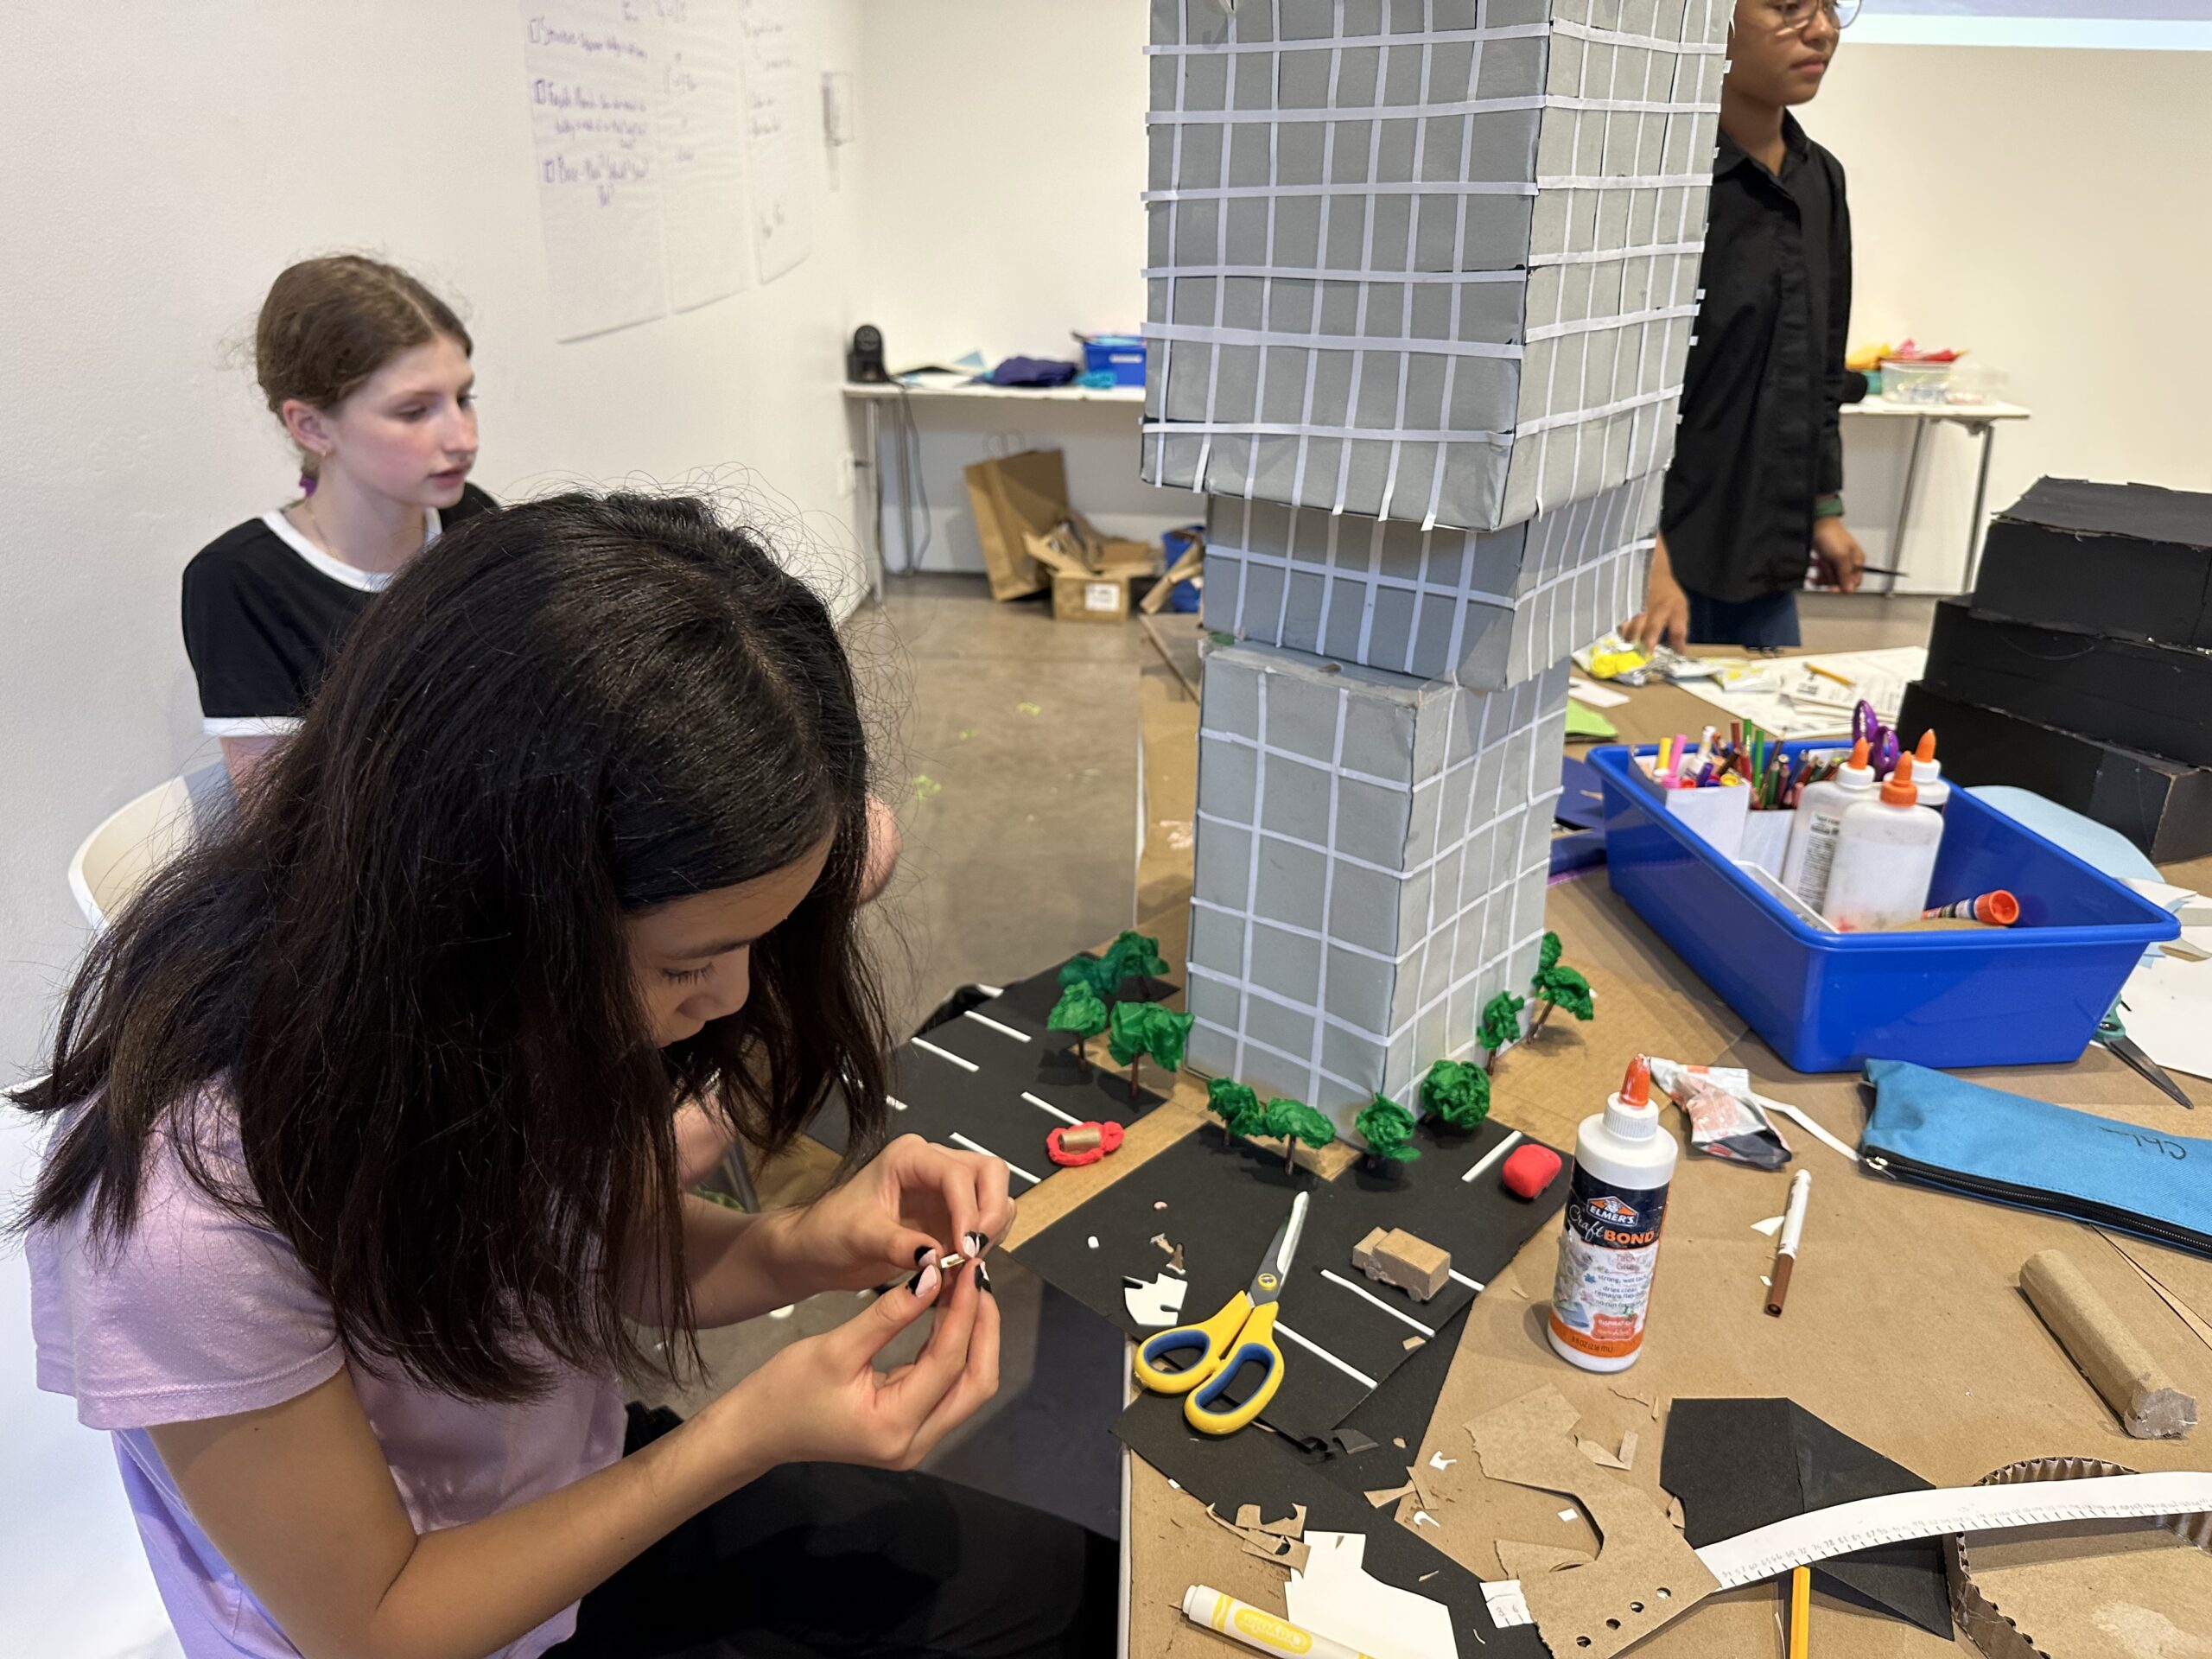 Middle school student working on a tall skyscraper model